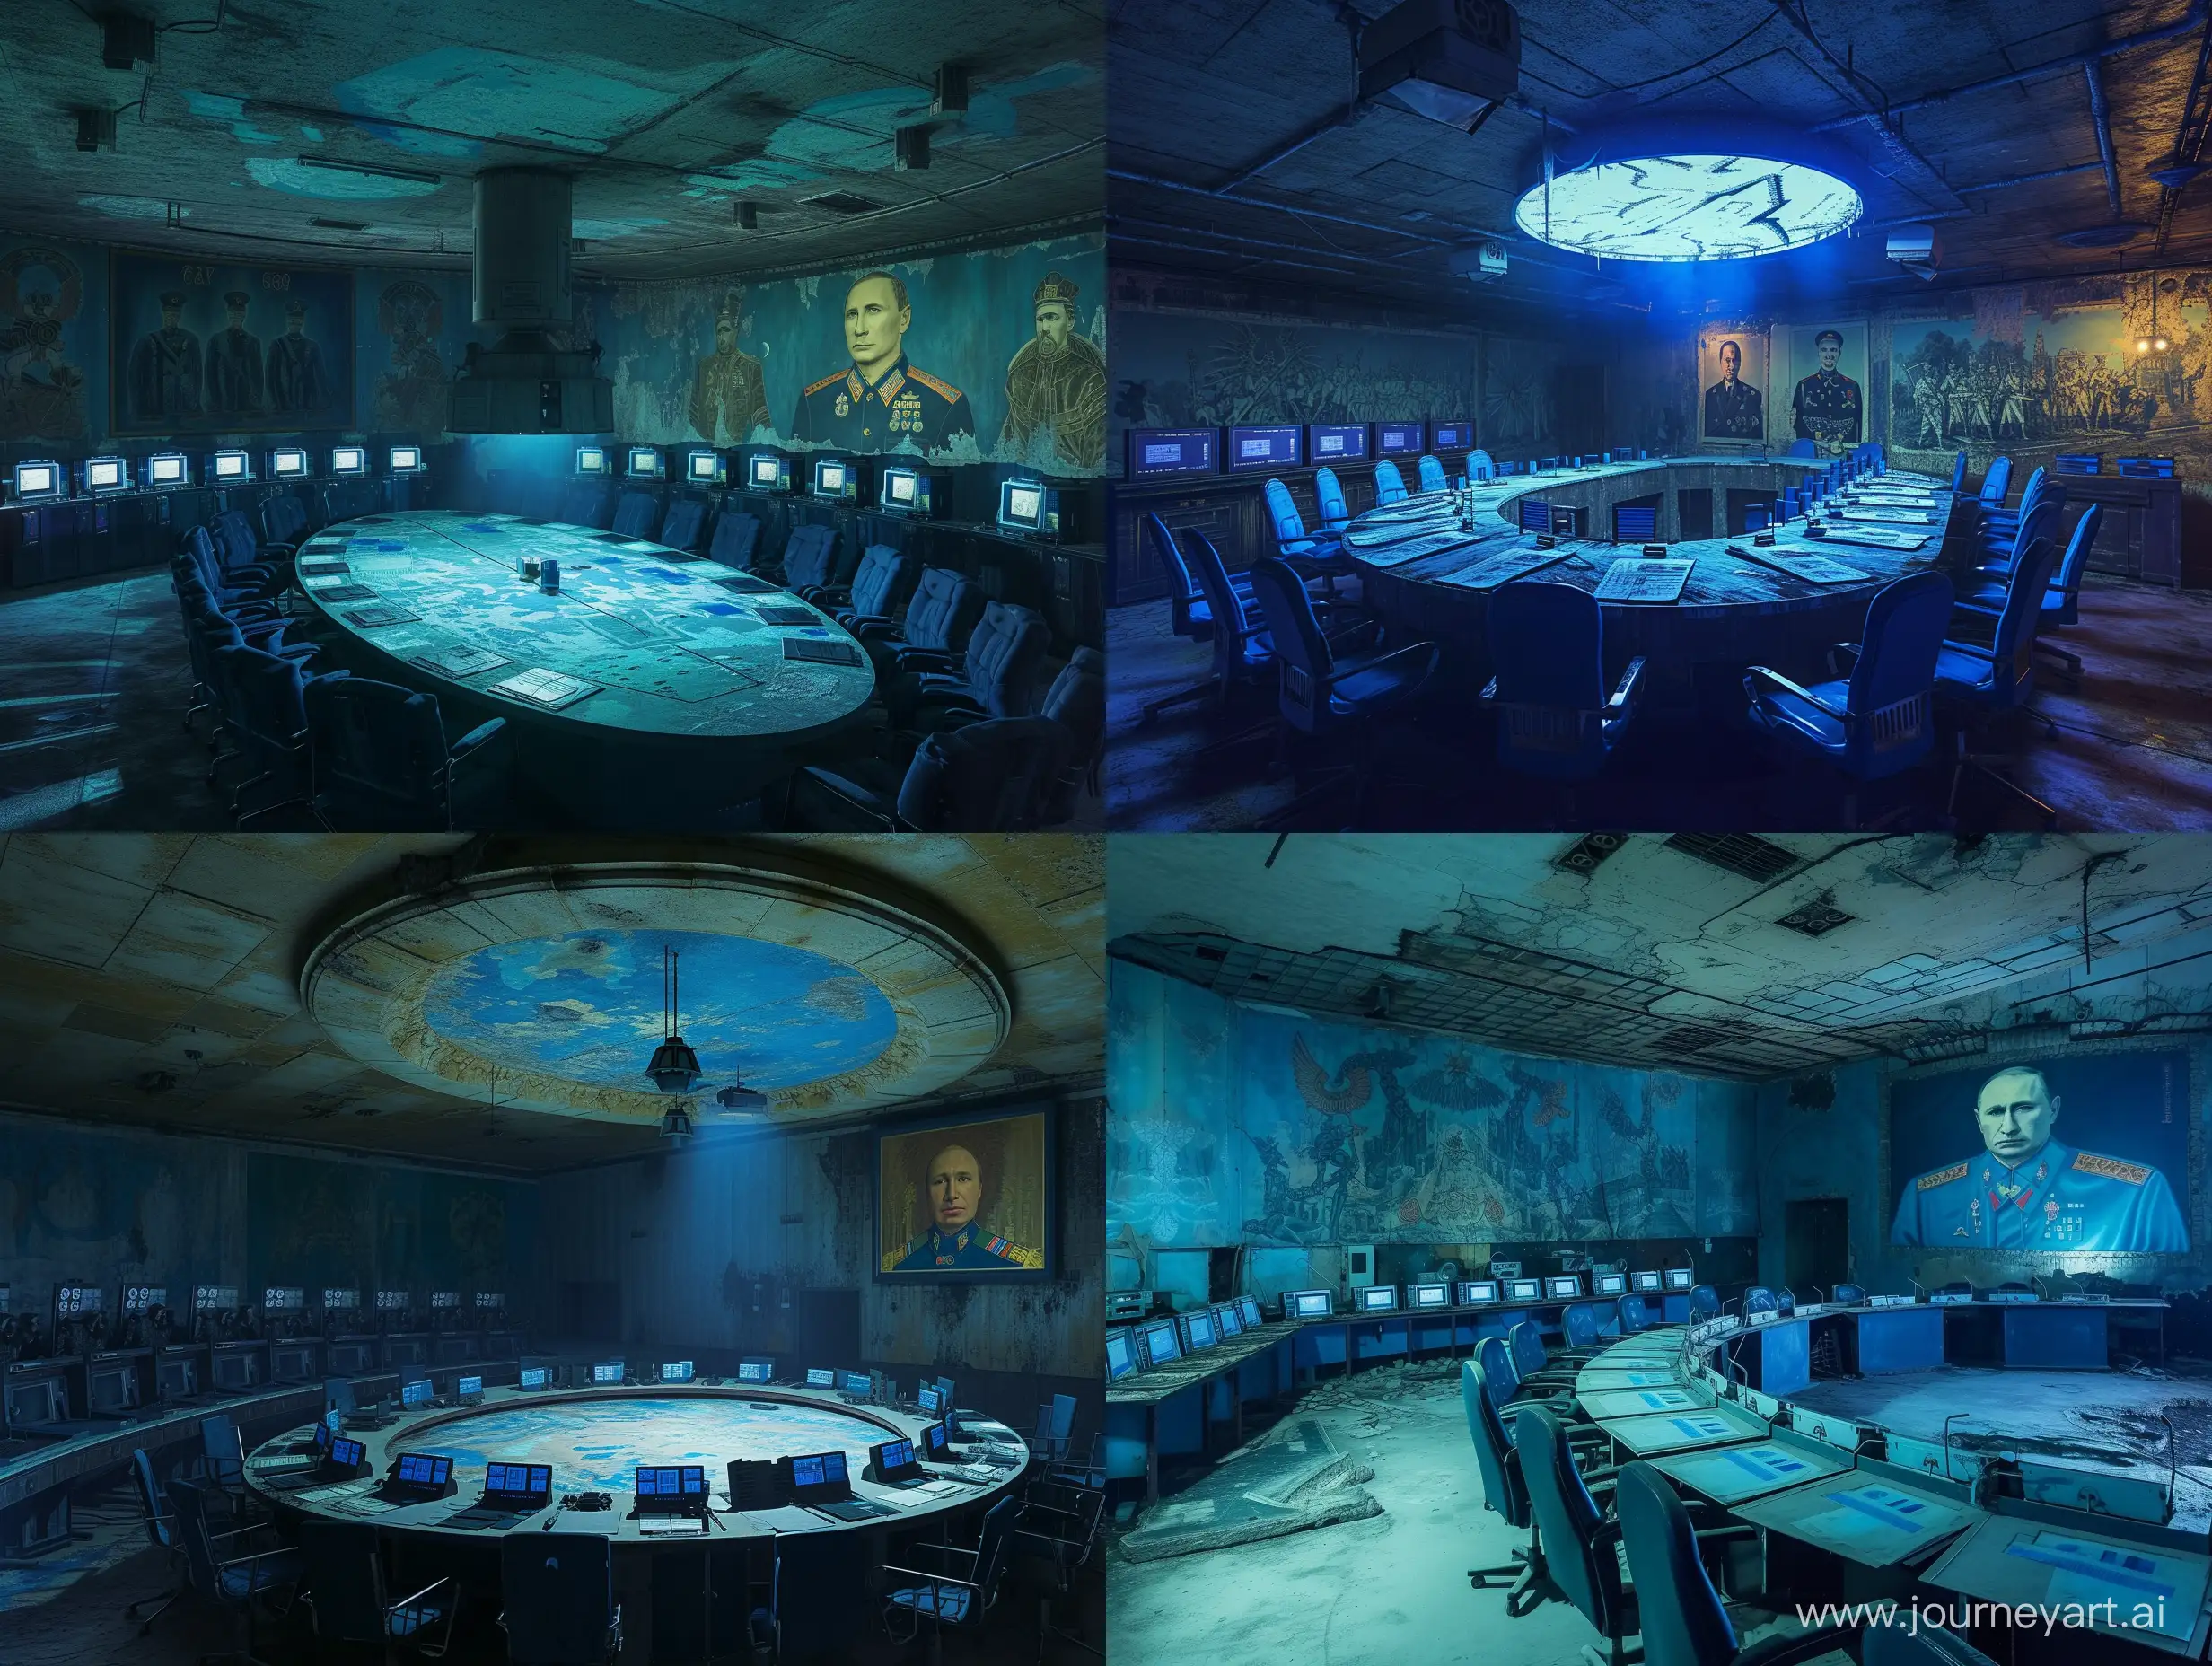 A dimly lit, subterranean chamber deep within a secret military installation in the heart of rural Russia. The walls and ceiling are adorned with intricate, faded murals, painted in shades of deep blue and indigo, depicting scenes of ancient Russian mythology and military triumphs. A faint, eerie glow emanates from rows of computer terminals lining one side of the room, casting an ethereal blue hue over the otherwise shadowy environment. In the center of the chamber, a massive, circular table is surrounded by ten high-ranking military officers, each wearing distinctive blue and gold uniforms. The table is covered with top-secret documents, maps, and technical schematics, all bearing the same distinctive blue stamp. The air is thick with tension and the whispered murmurs of hushed conversations, as the officers discuss classified information and plot strategies under the watchful gaze of a massive portrait of a stern-looking Vladimir Putin hanging on the wall behind them.